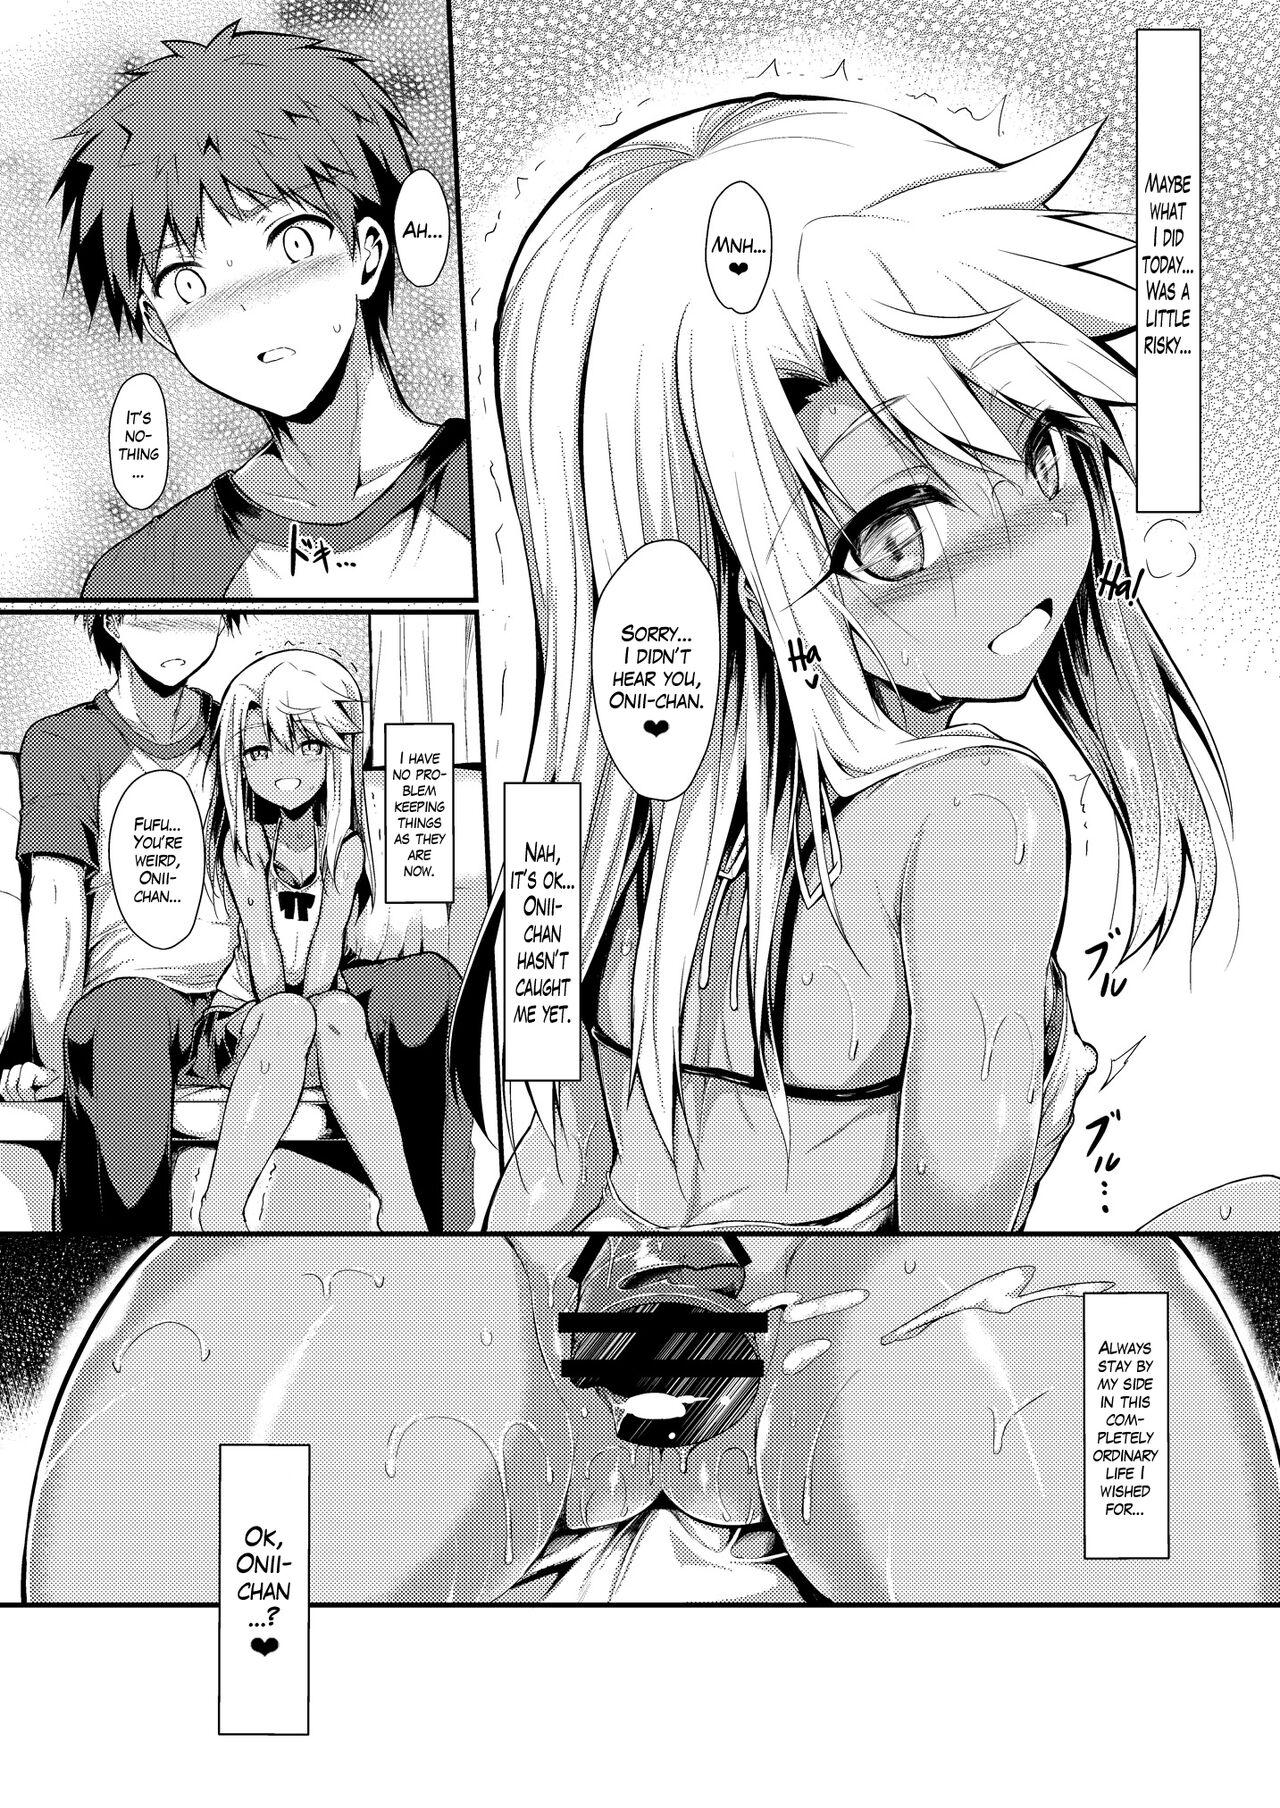 [ASTRONOMY (SeN)] Imouto wa Onii-chan to Shouraiteki ni Flag o Tatetai 3 | The little sister wants to have a flag set so she gets Onii-chan in the future 3 (Fate/kaleid liner Prisma Illya) [English] [The Blavatsky project] [Digital] 22